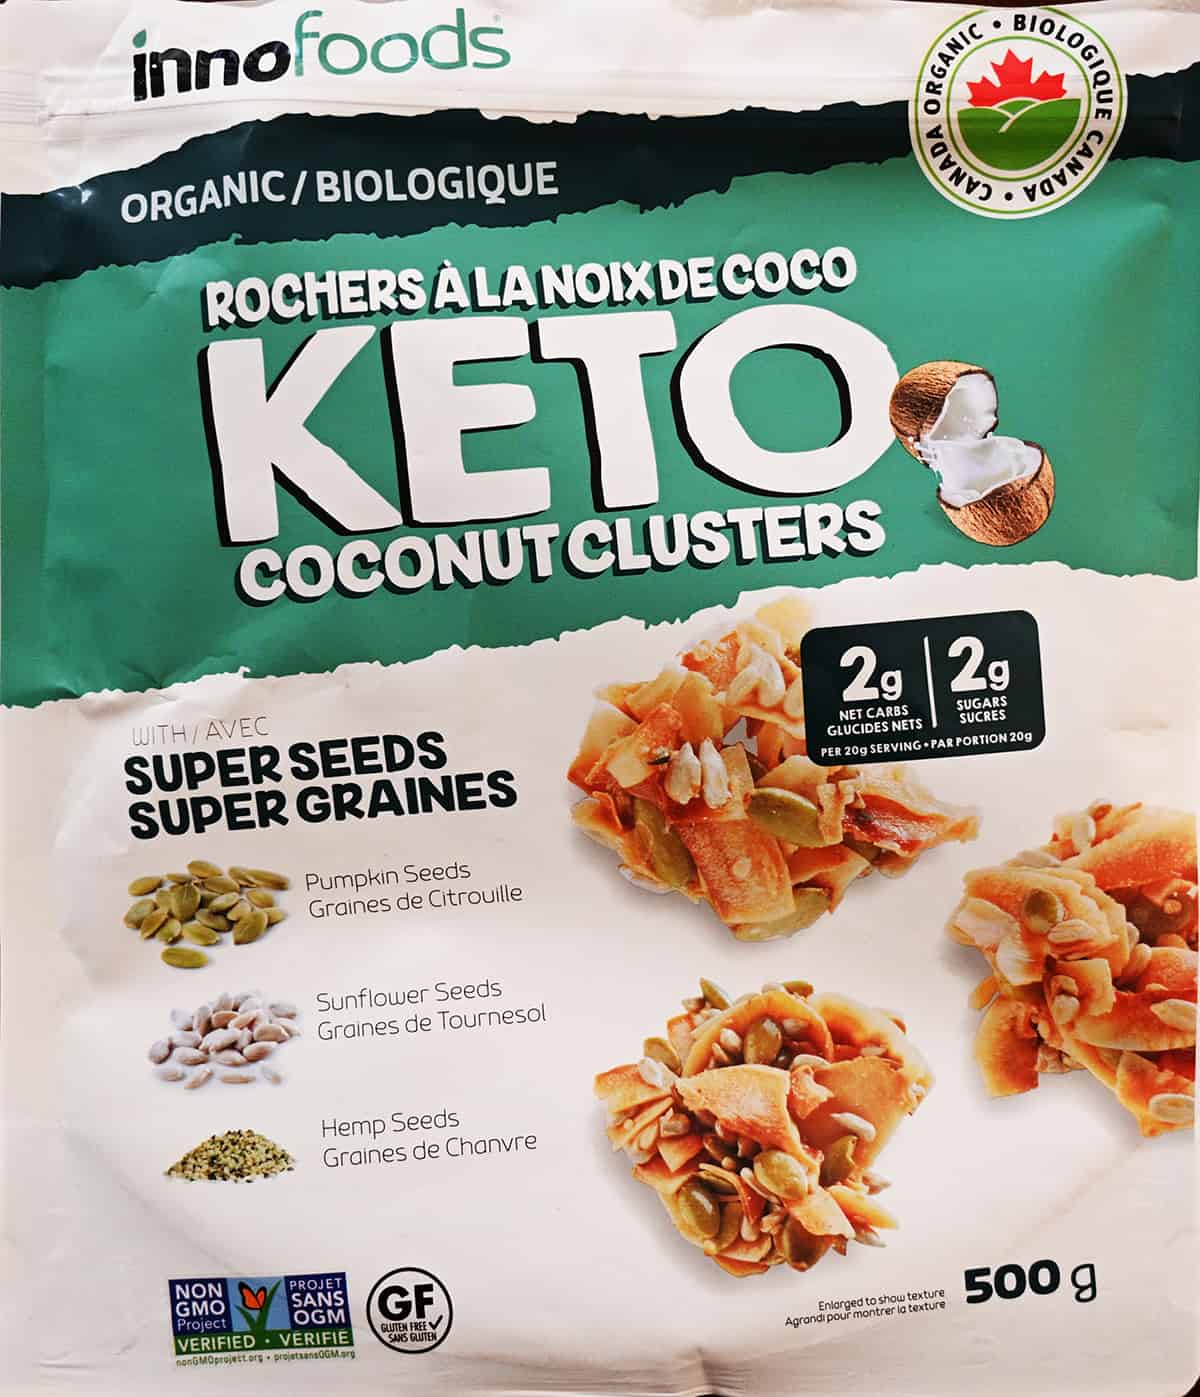 Closeup image of the front of the keto coconut clusters bag.